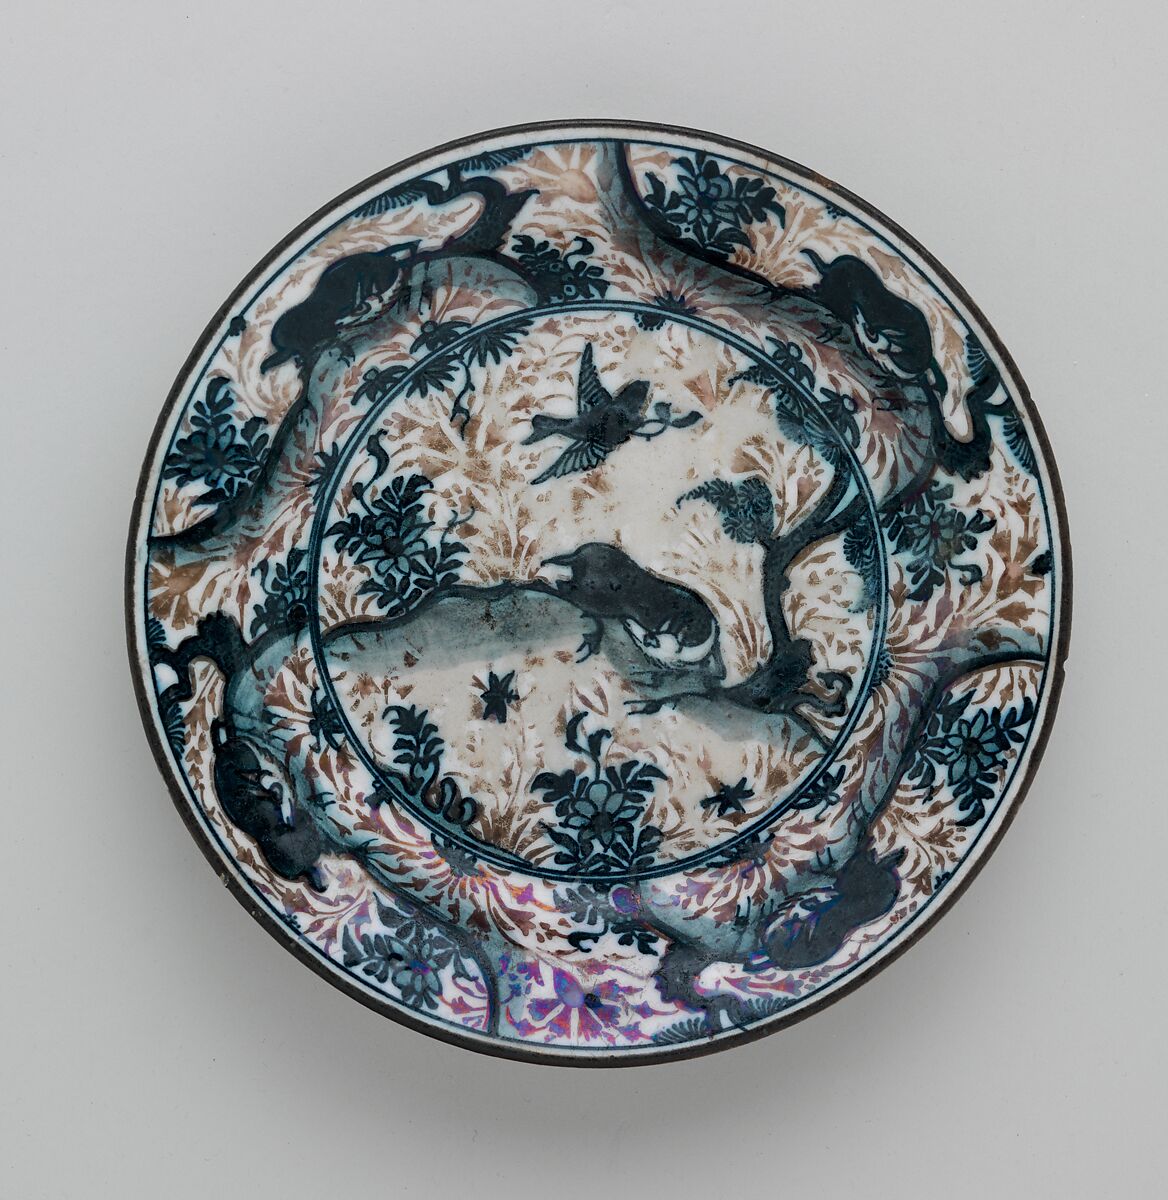 Plate Depicting Birds and Animals, Stonepaste; painted under transparent glaze 